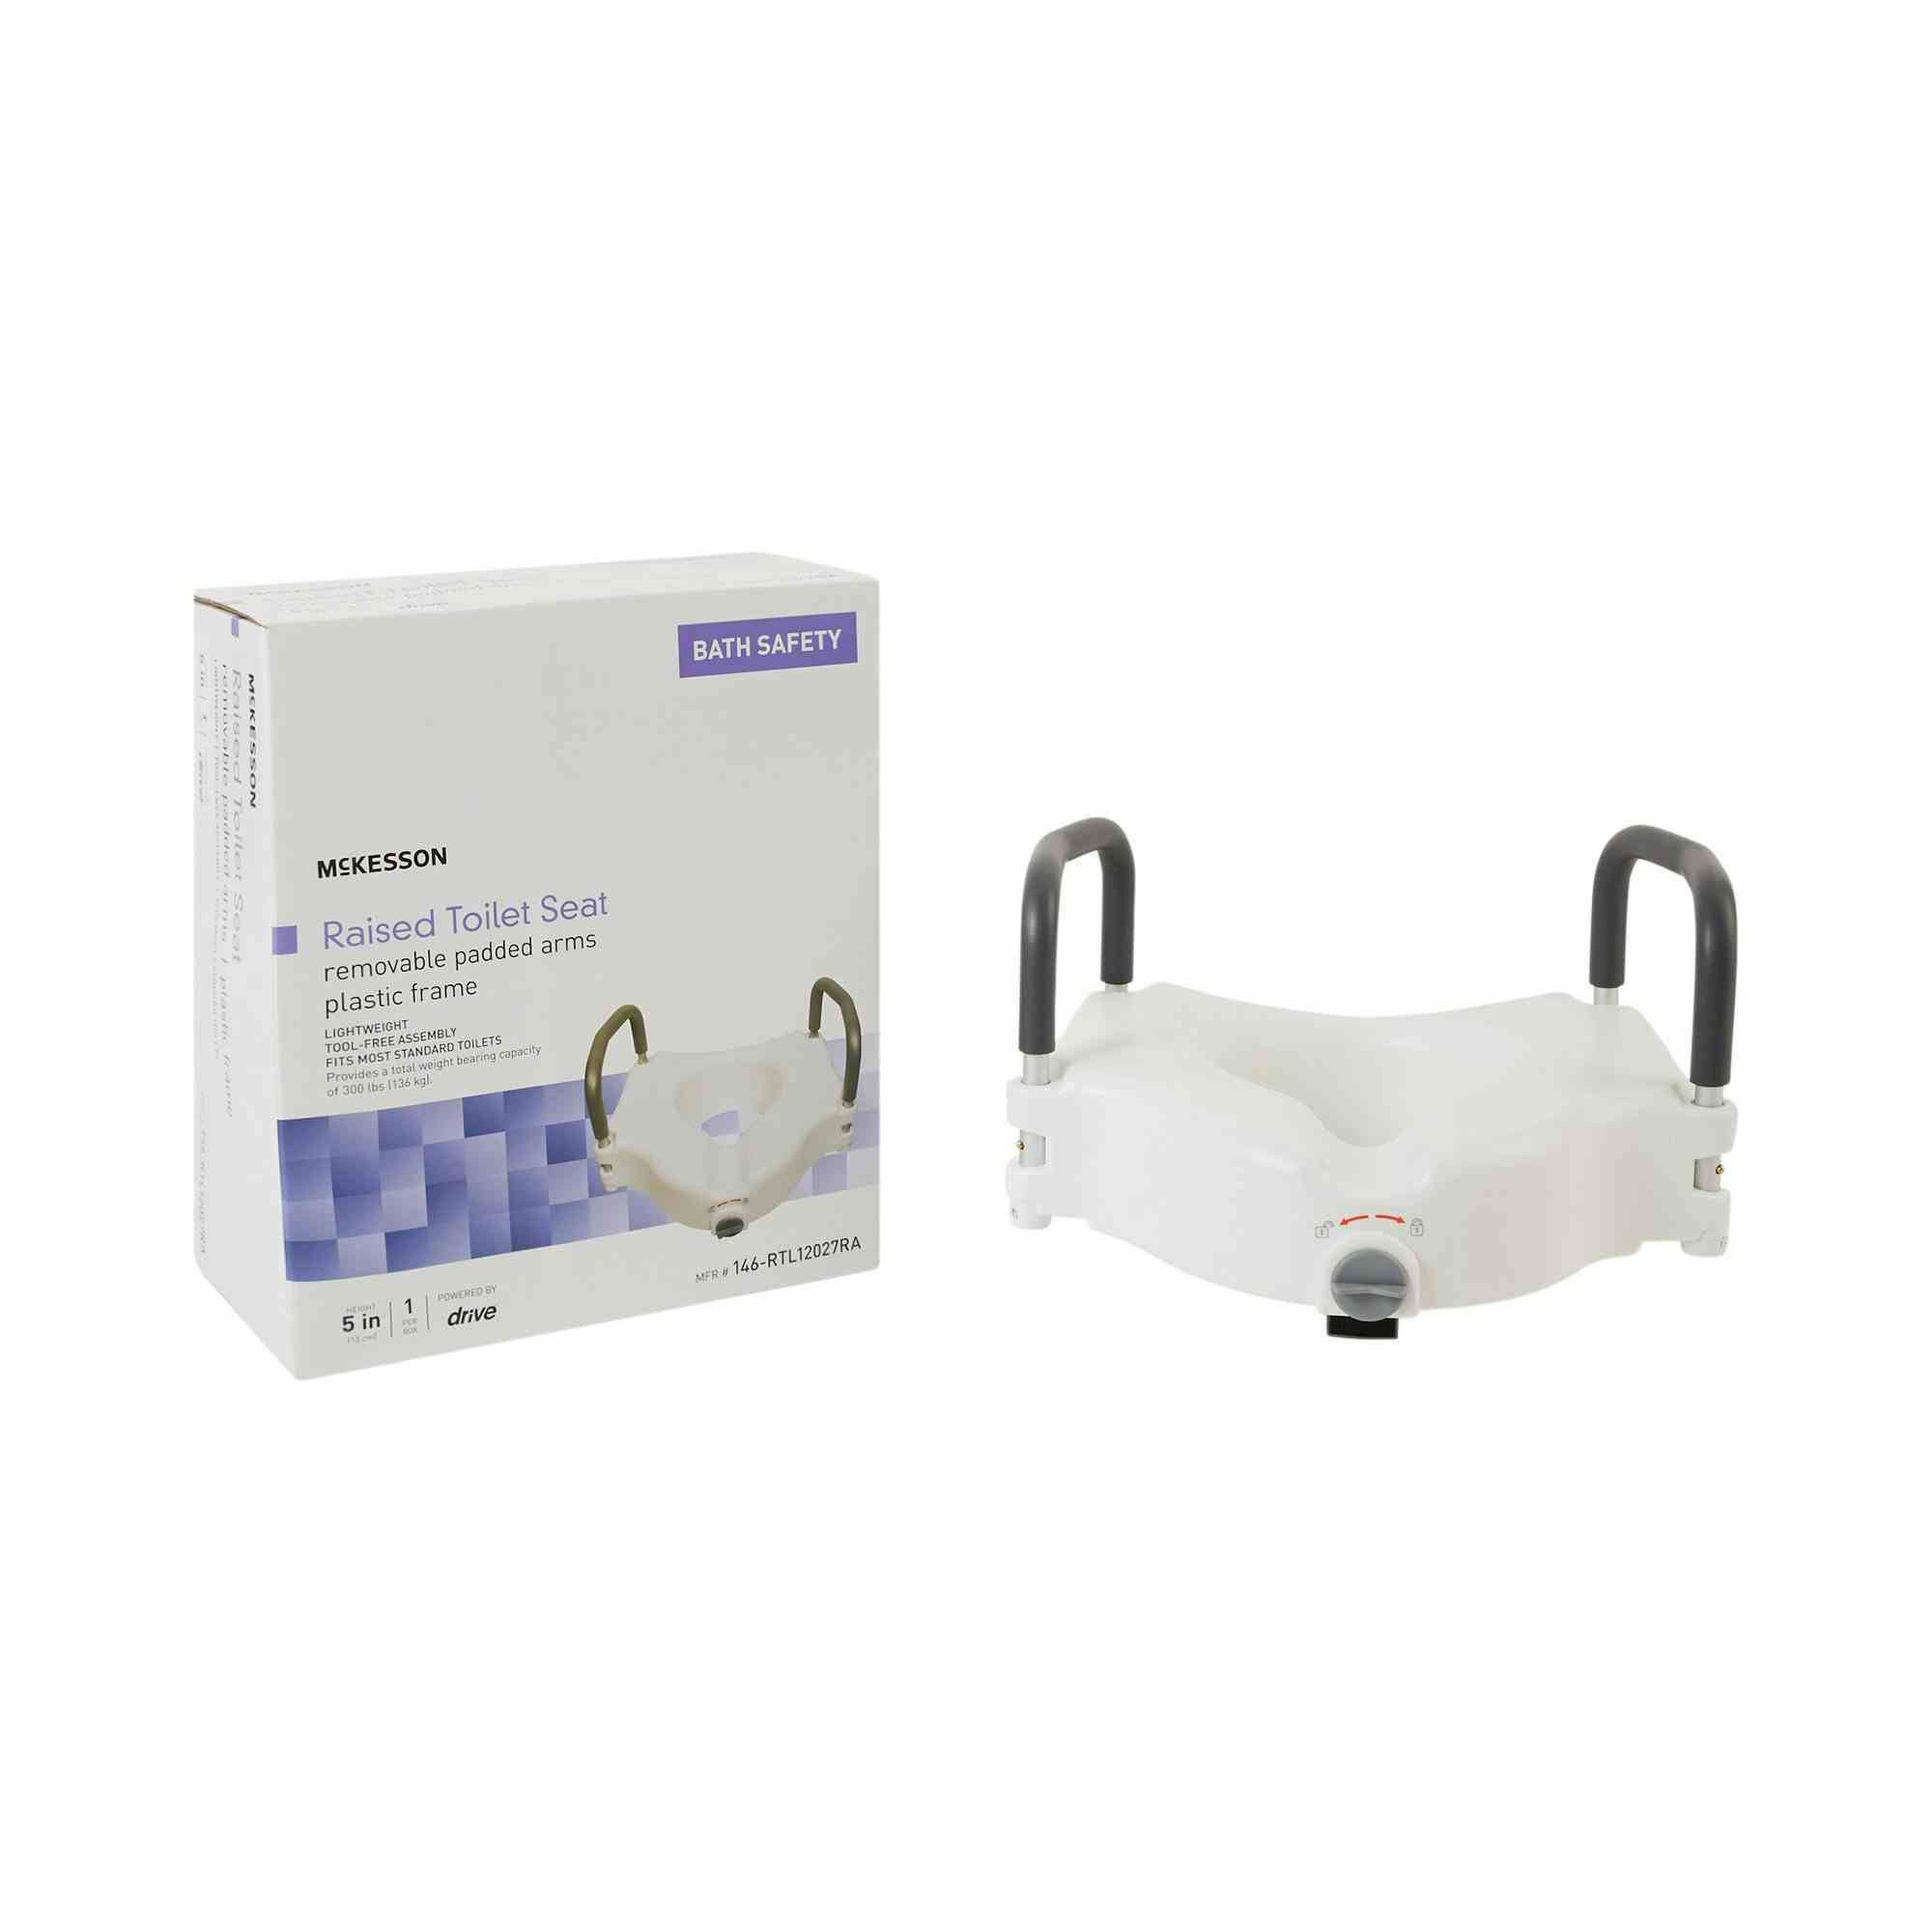 McKesson Raised Toilet Seat, Removable Padded Arms, Plastic Frame, 5" Height, 146-RTL12027RA, 1 Each